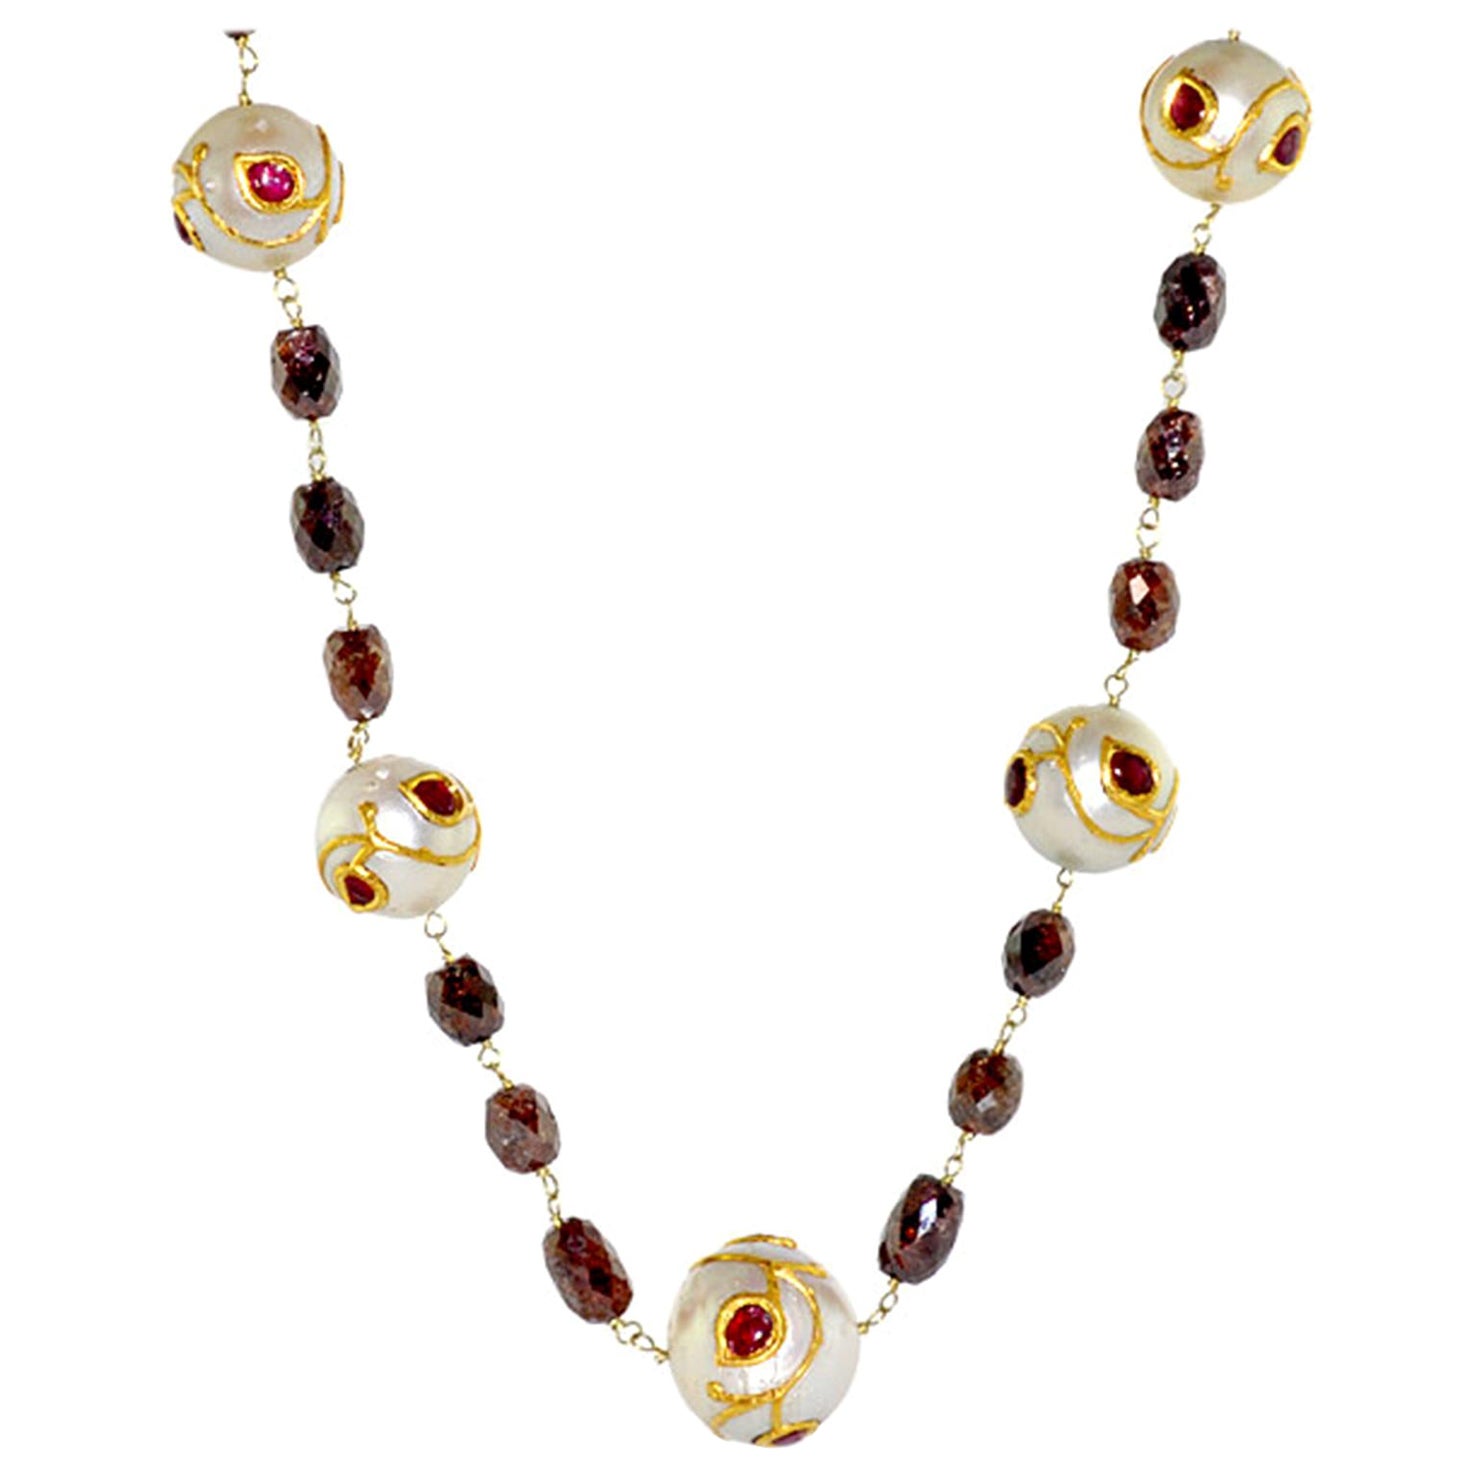 Designer Beaded Necklace with Diamonds, Ruby and South Sea Pearl in 14k Gold For Sale